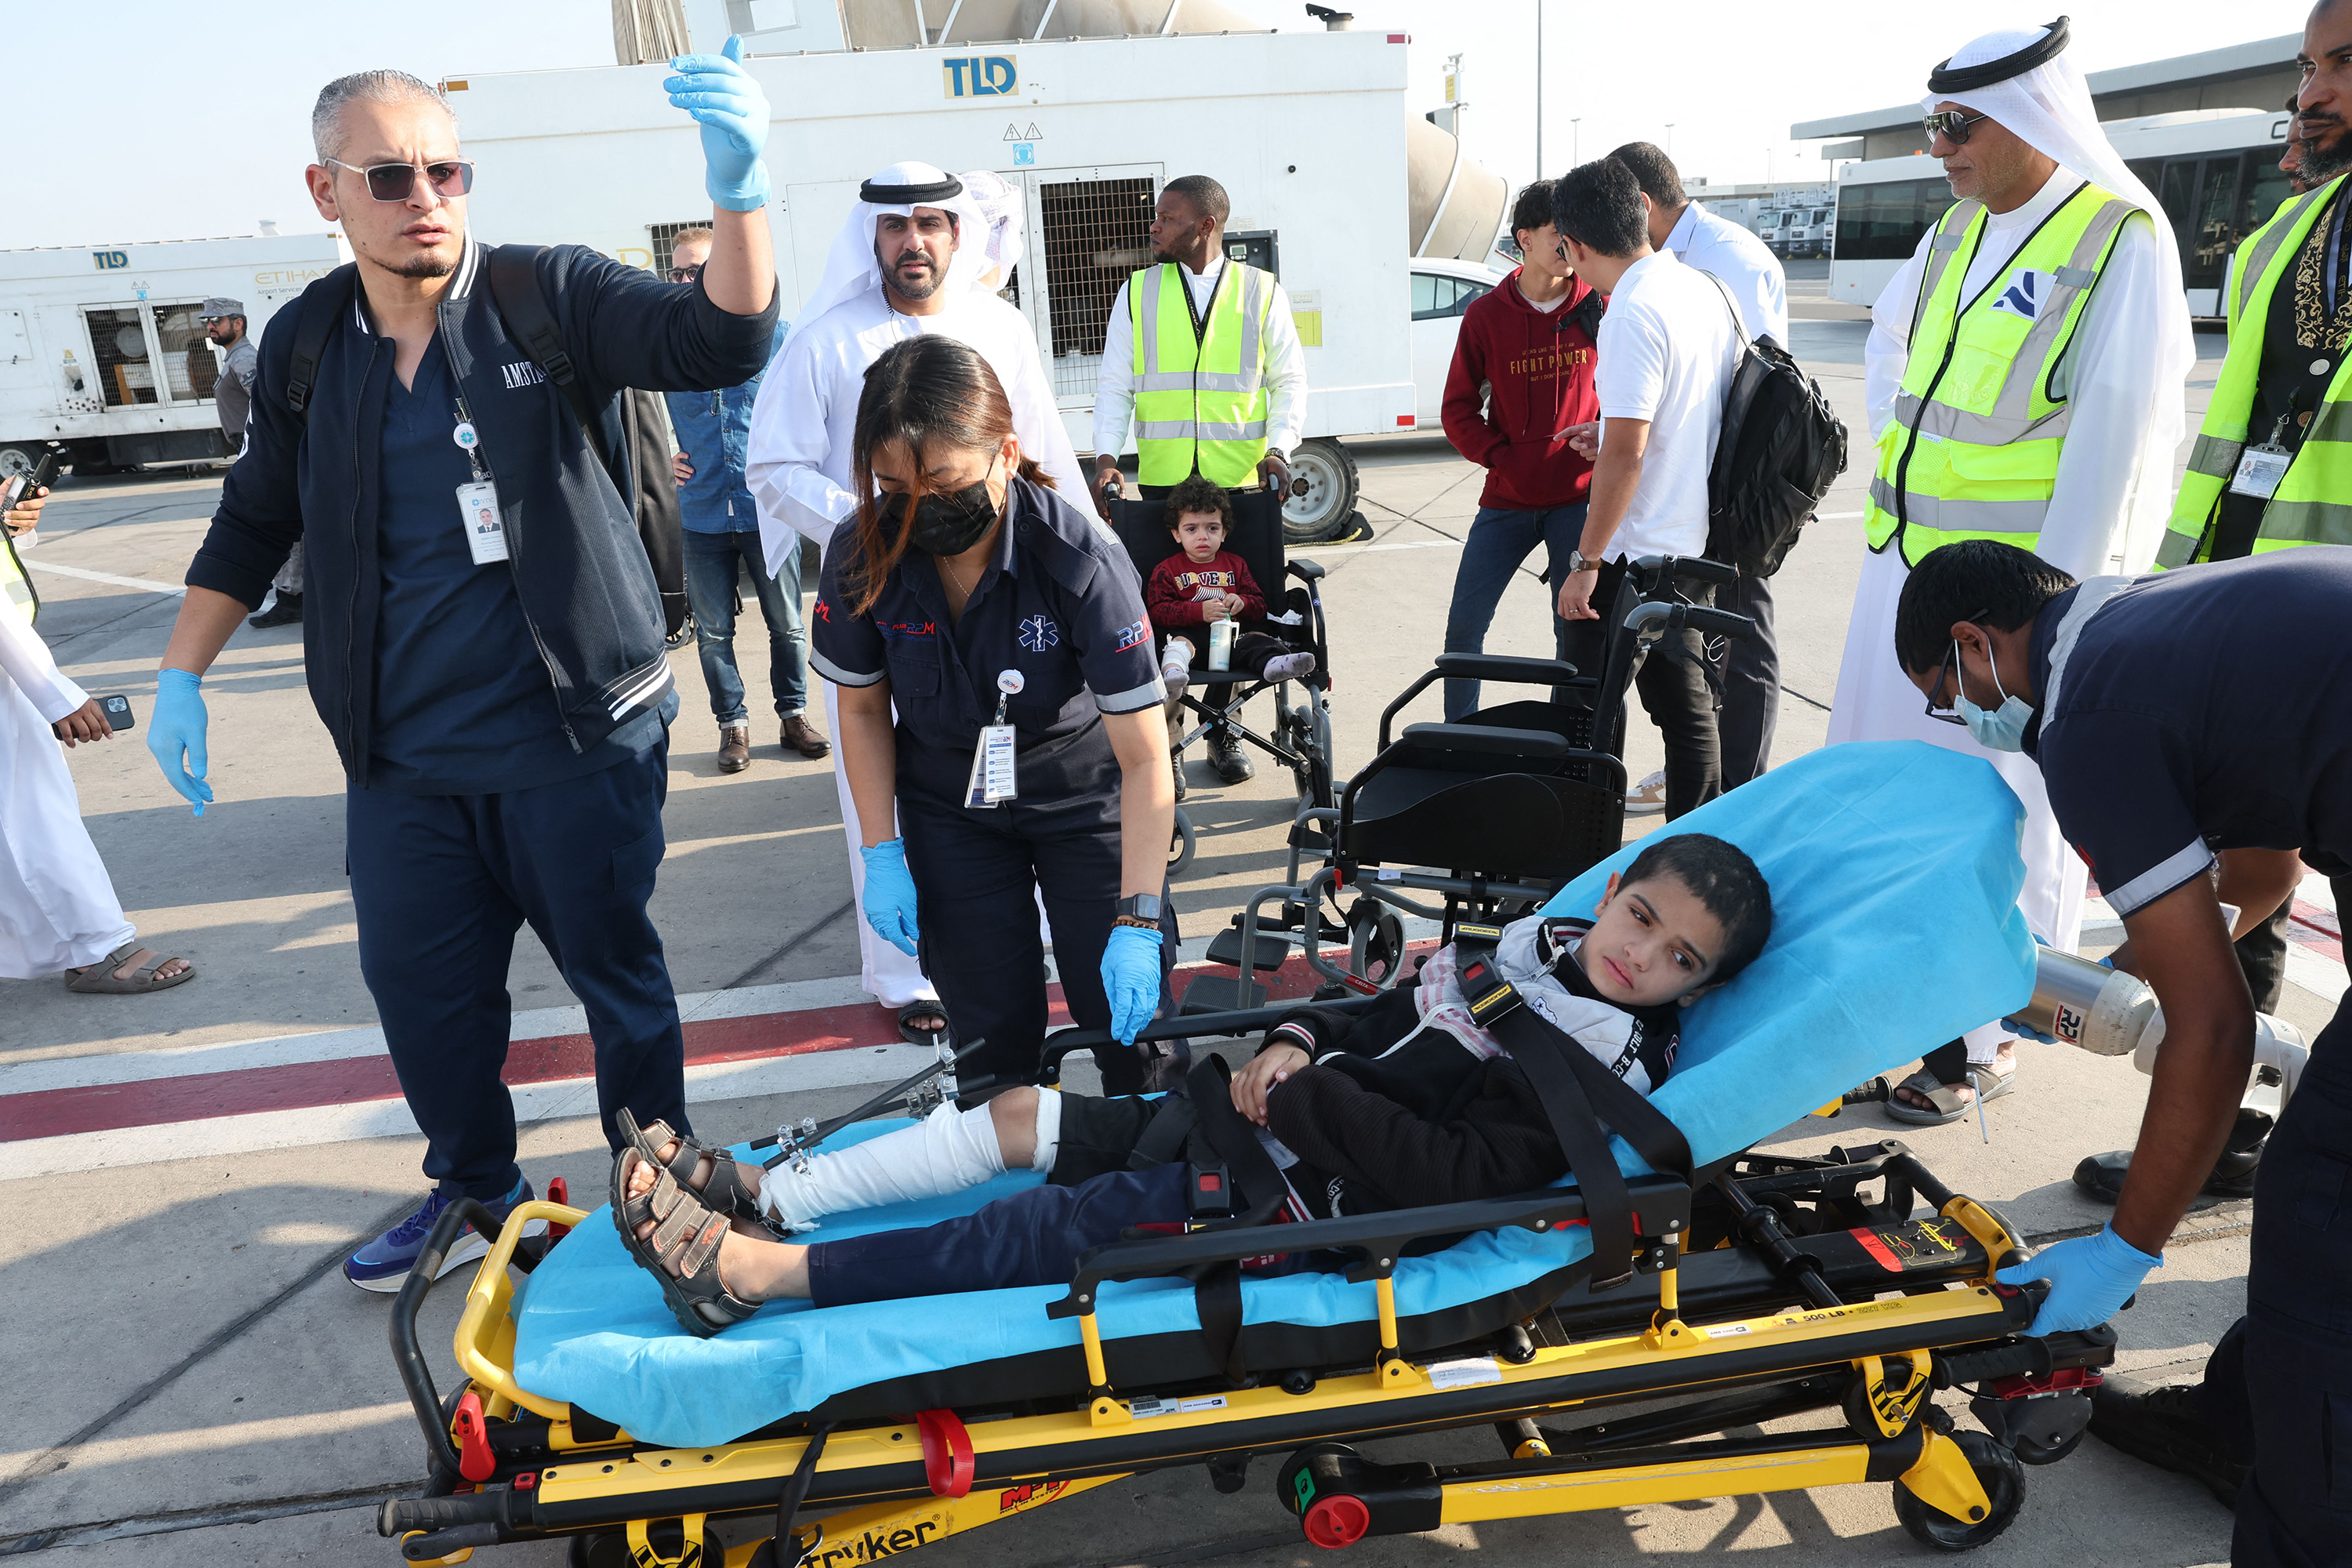 Volunteers transport a wounded Palestinian child off the plane upon their arrival in Abu Dhabi on November 18, after being evacuated from Gaza as part of a humanitarian mission organized by the United Arab Emirates. 